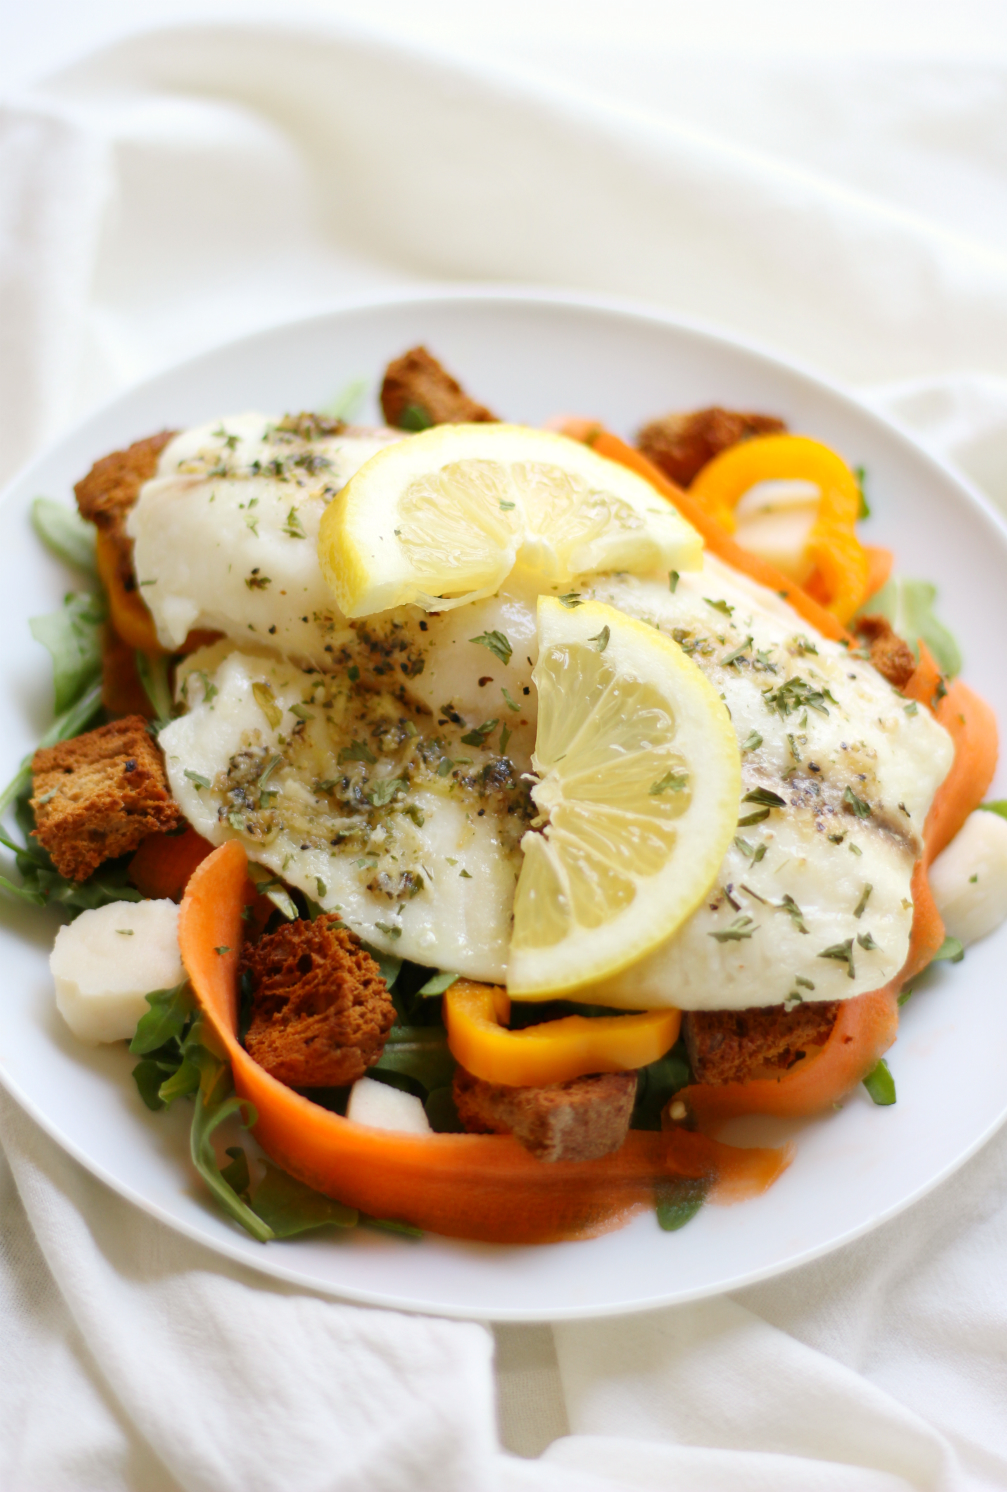 Lemon Pepper Tilapia + Spring Arugula Salad & Homemade Garlic Herb Croutons | Strength and Sunshine @RebeccaGF666 A simple spring weeknight dinner recipe for lemon pepper tilapia with a fresh arugula salad and homemade gluten-free, dairy-free garlic herb croutons! Ready in 20 minutes or less so you have time to sit down and enjoy!